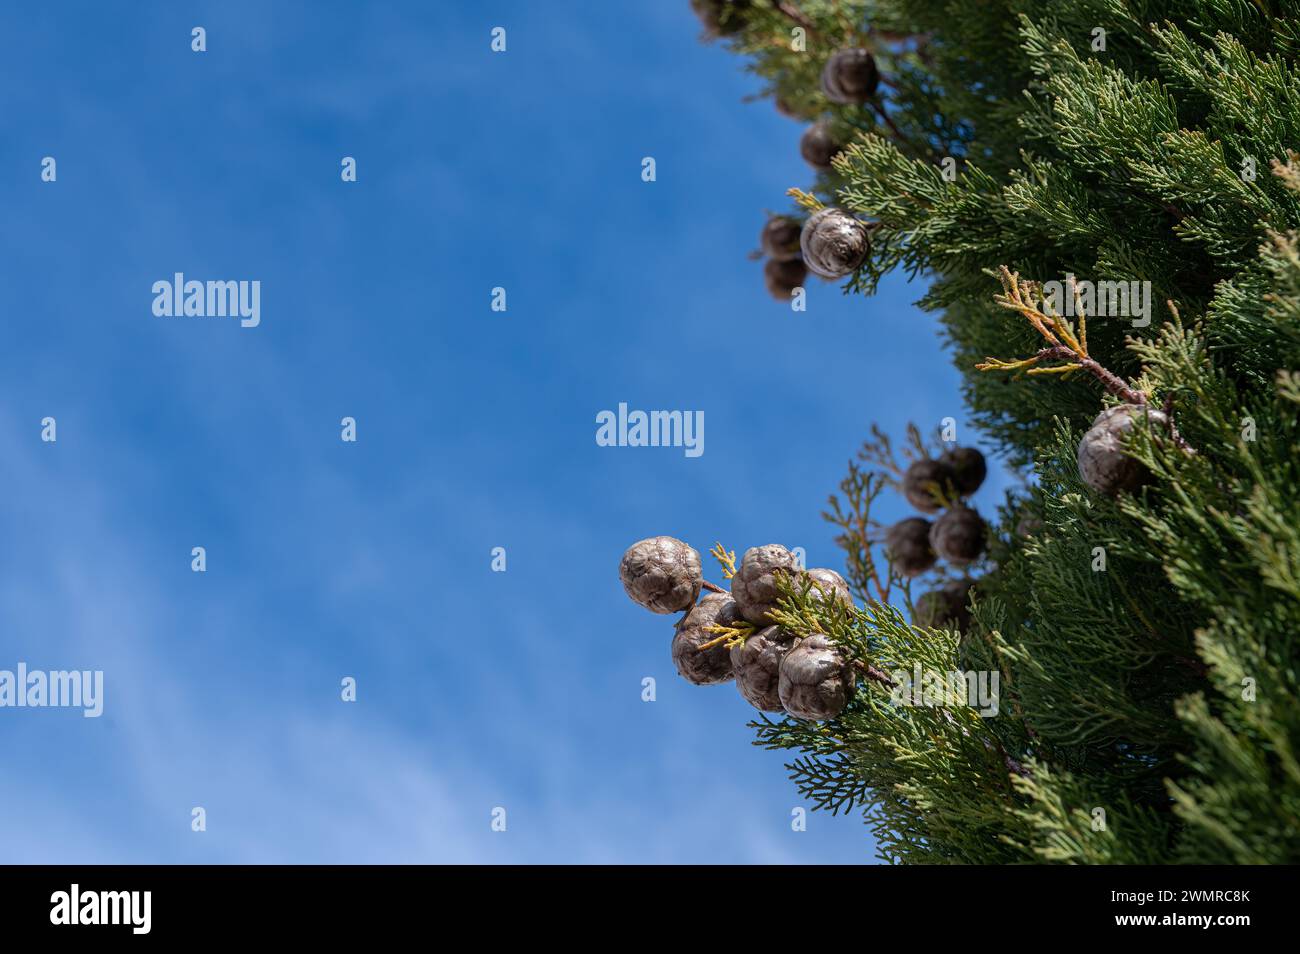 The tree, also known as cemetery cypress in Turkey, and its small cones. Cupressus sempervirens, cloudy sky background. Stock Photo